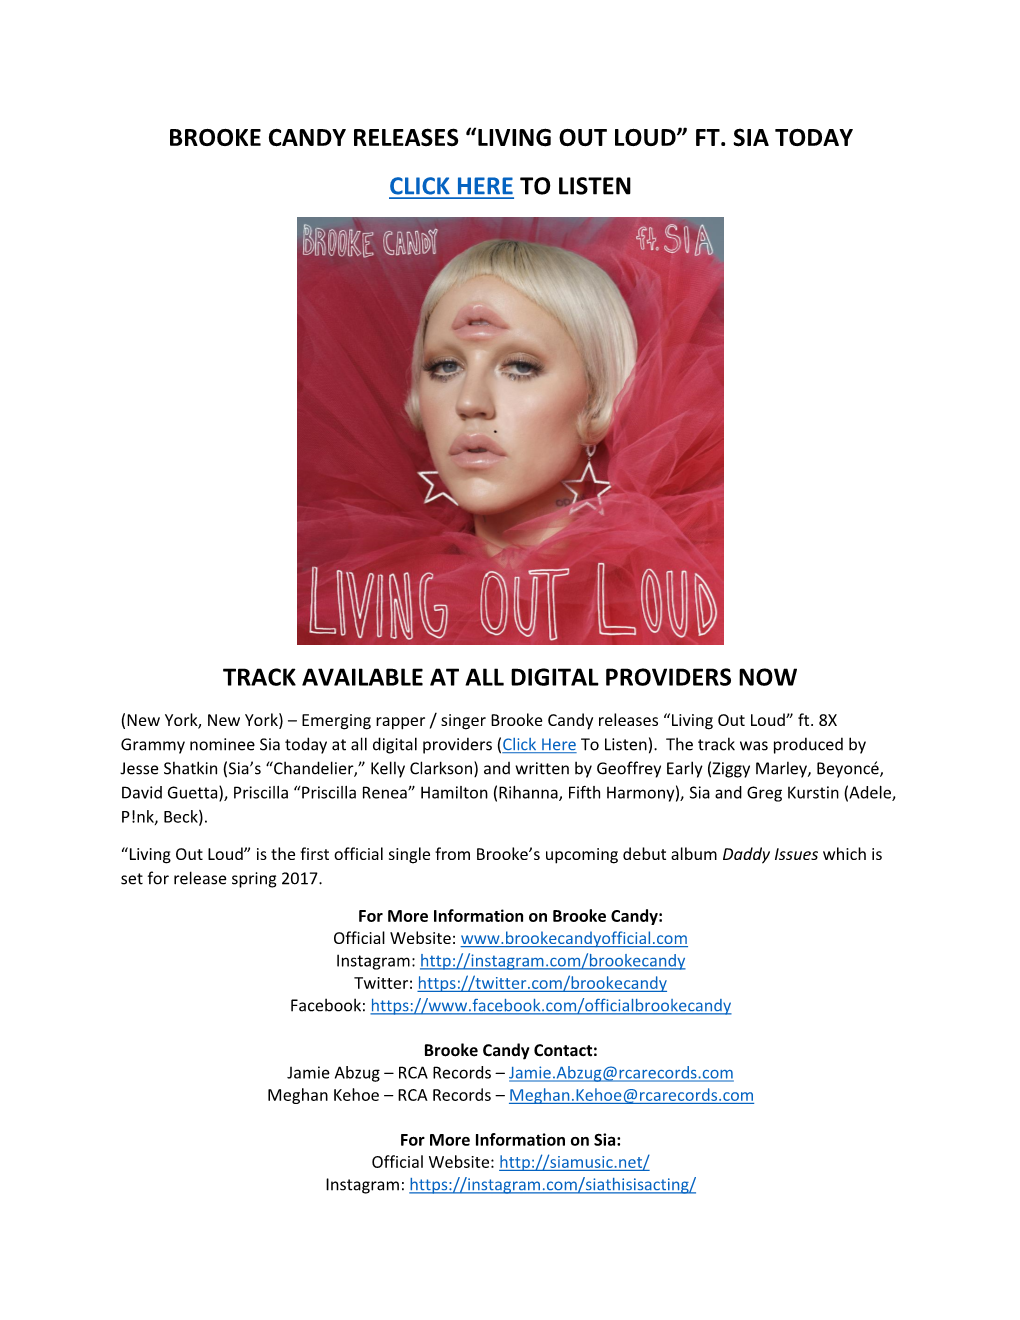 Brooke Candy Releases “Living out Loud” Ft. Sia Today Click Here to Listen